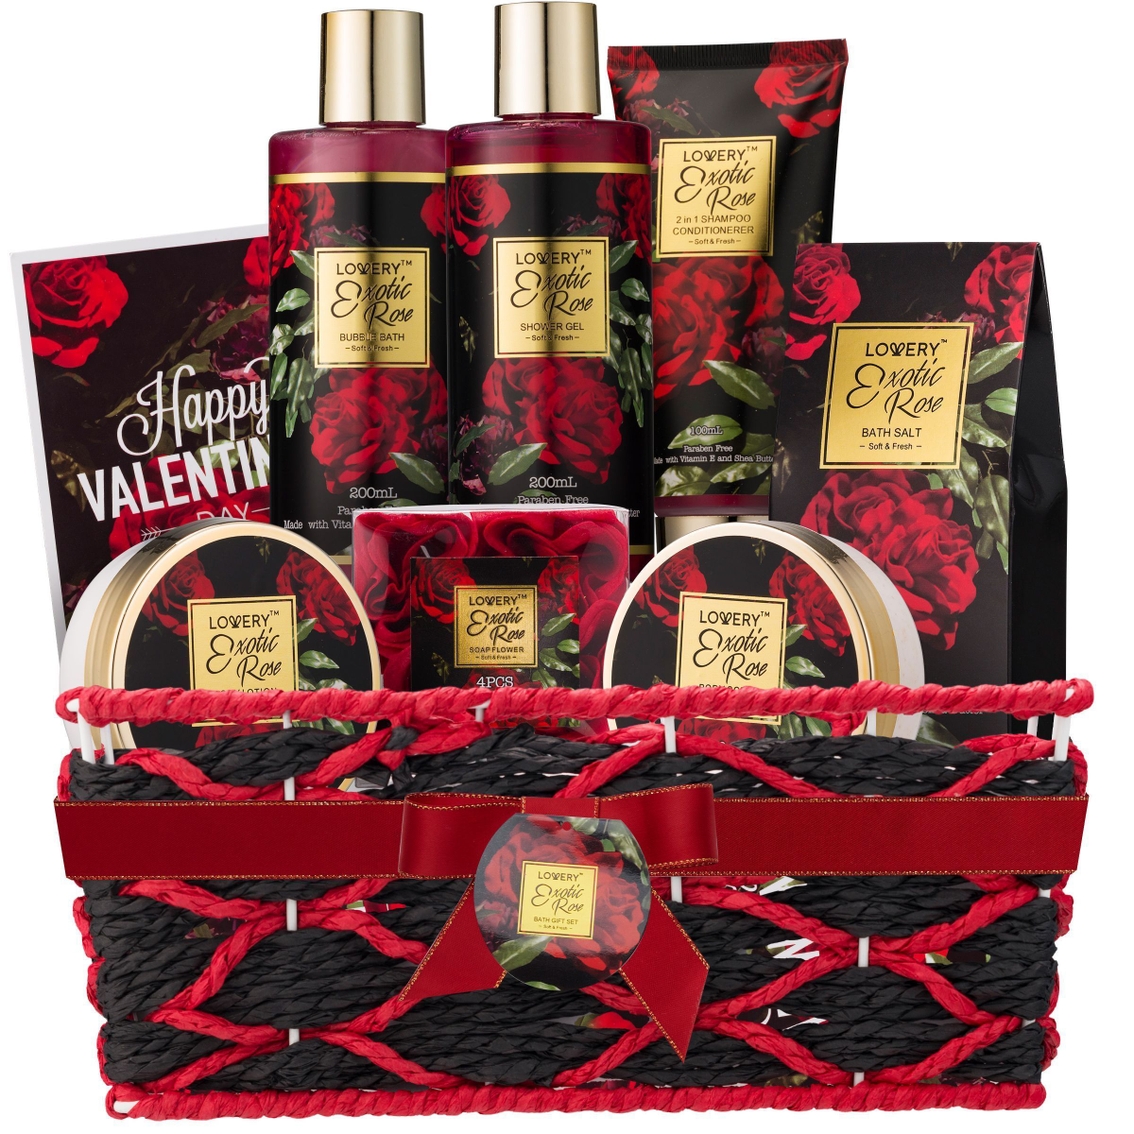 Spa Gifts for Women, Bath and Body Gift Set, Red Rose Gift Basket